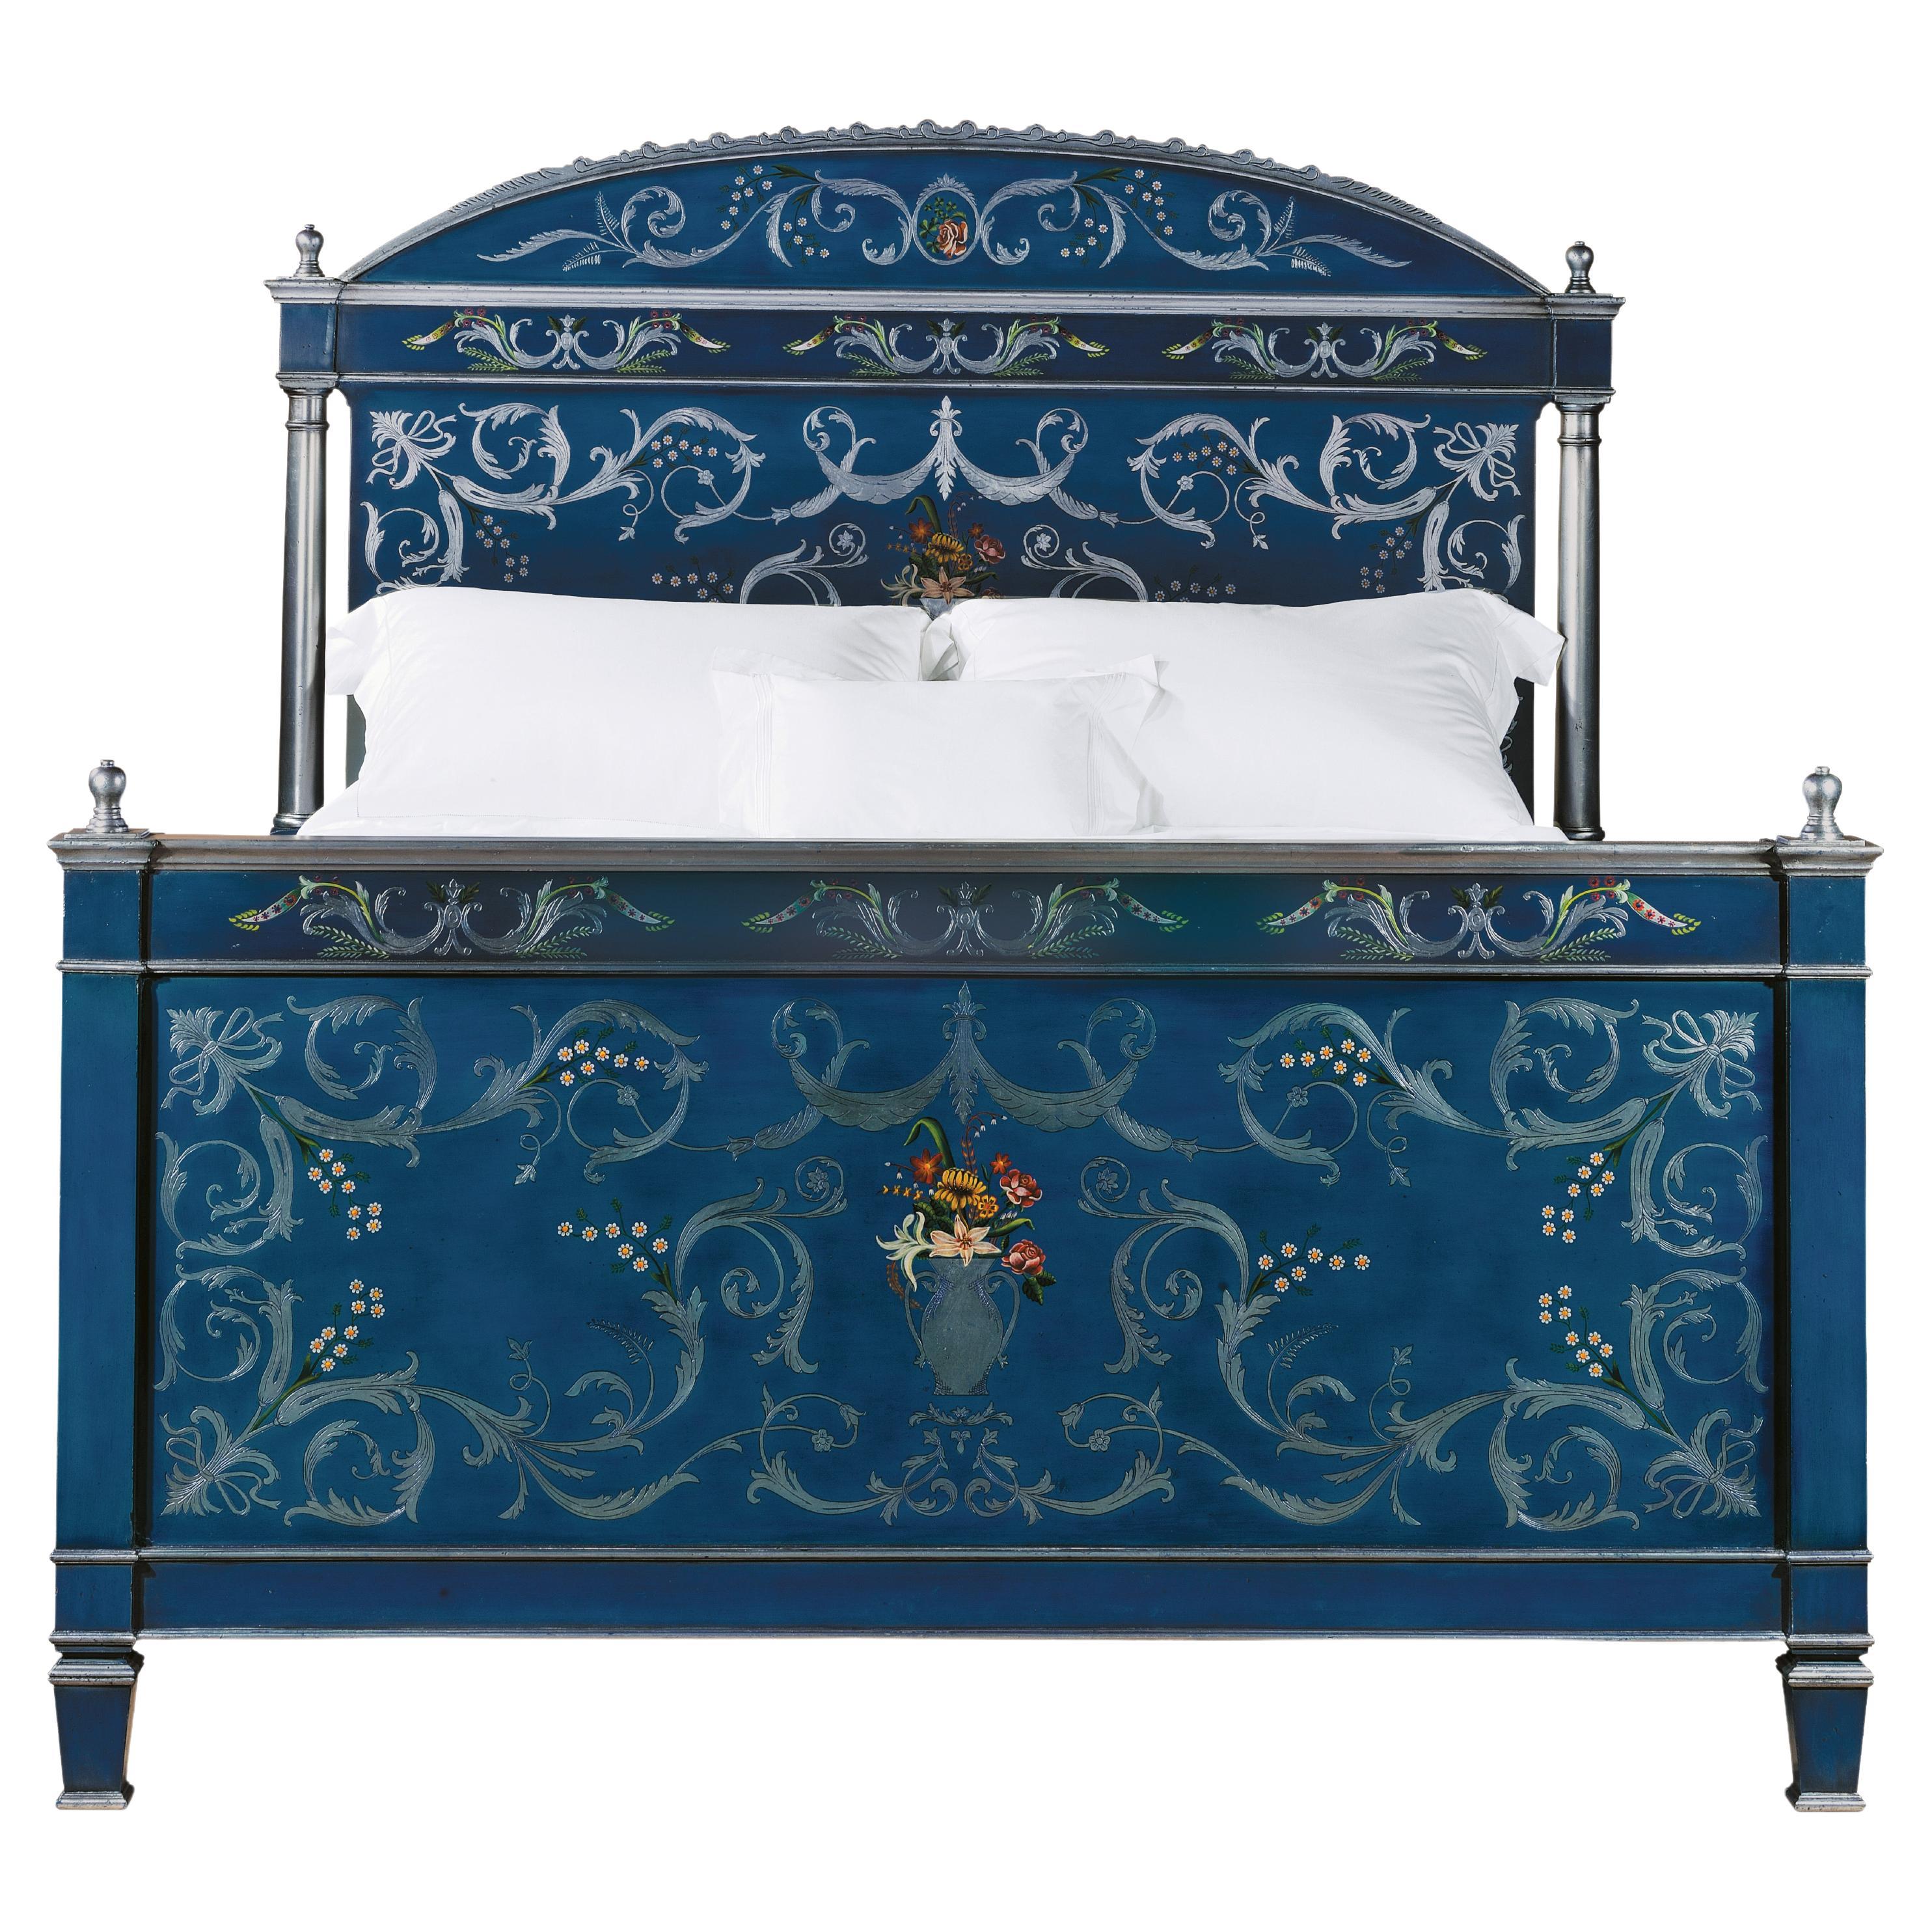 French with Italian Influence Style Hand-Painted Flandes Bed For Sale